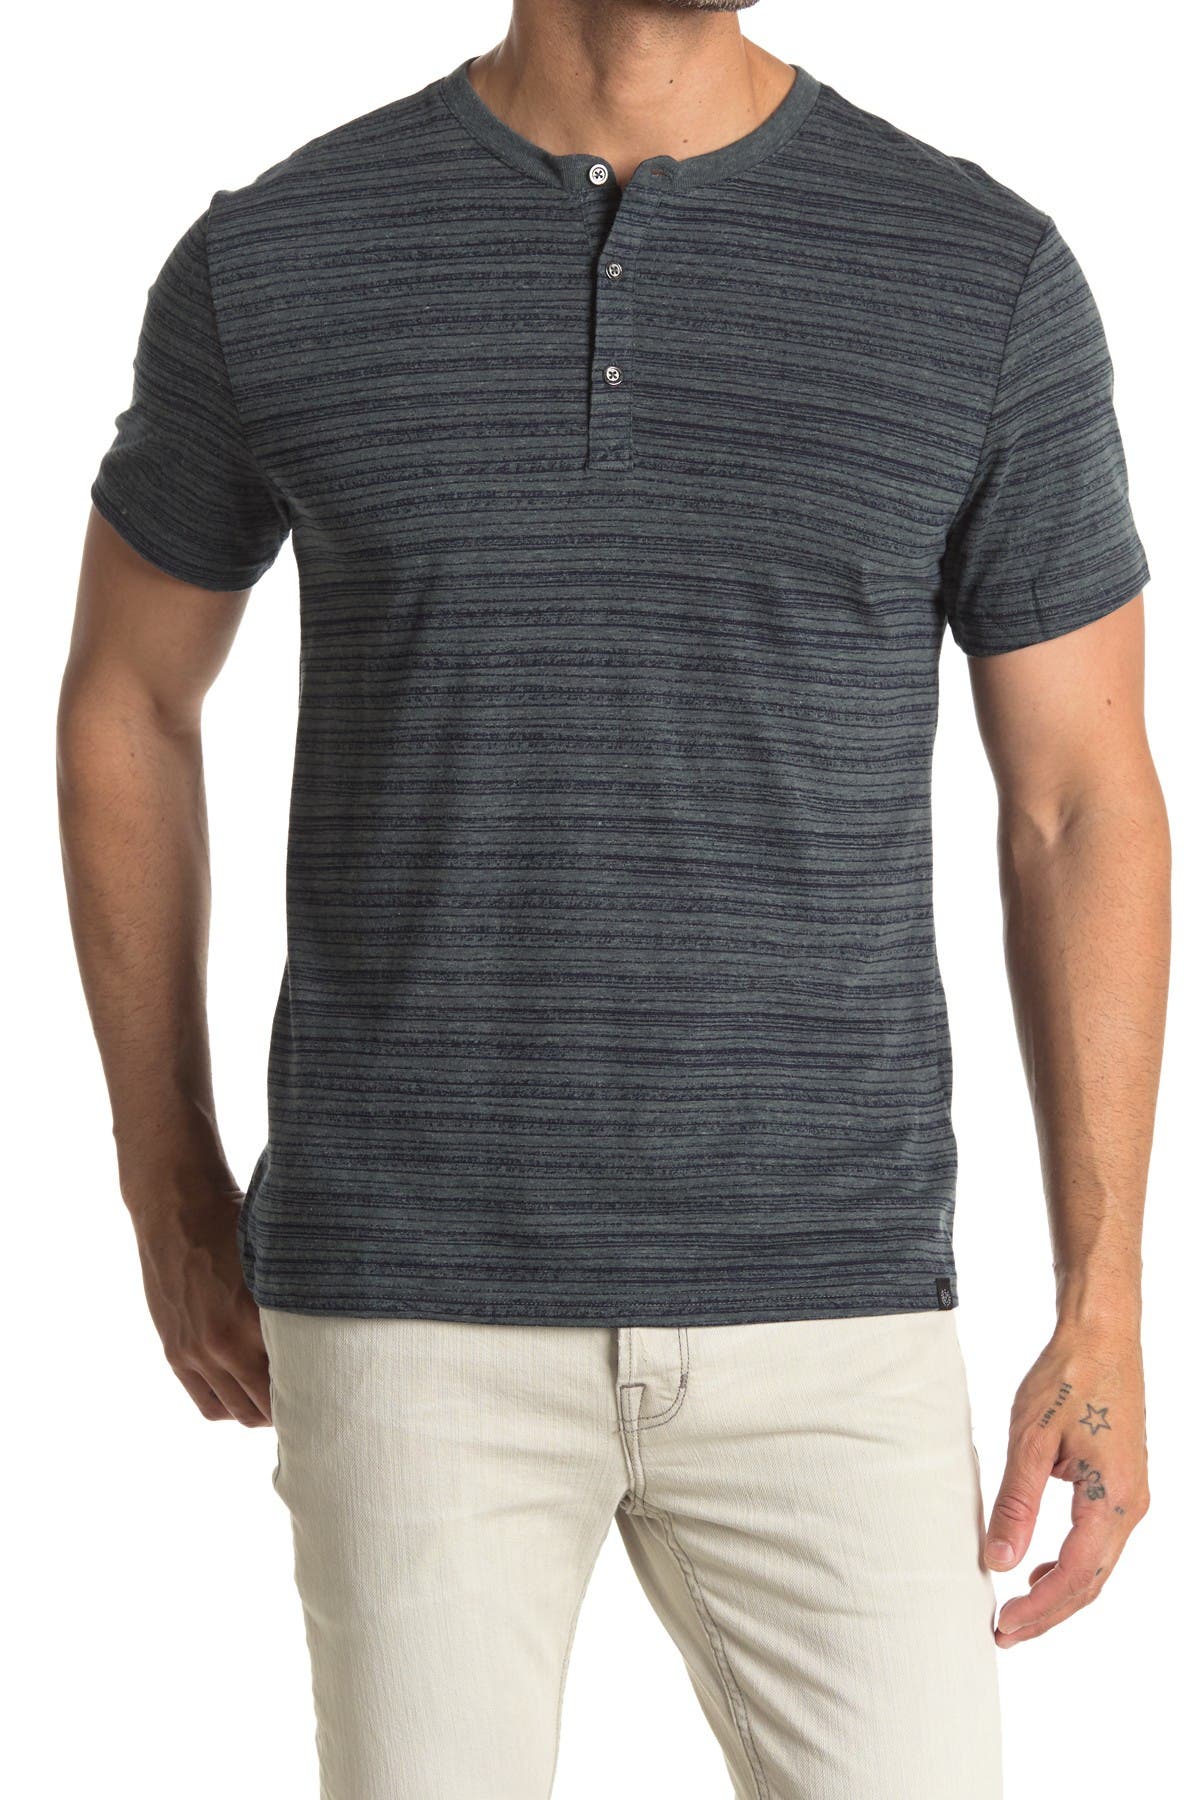 Threads 4 Thought Striped Short Sleeve Henley T-shirt In Open Grey32